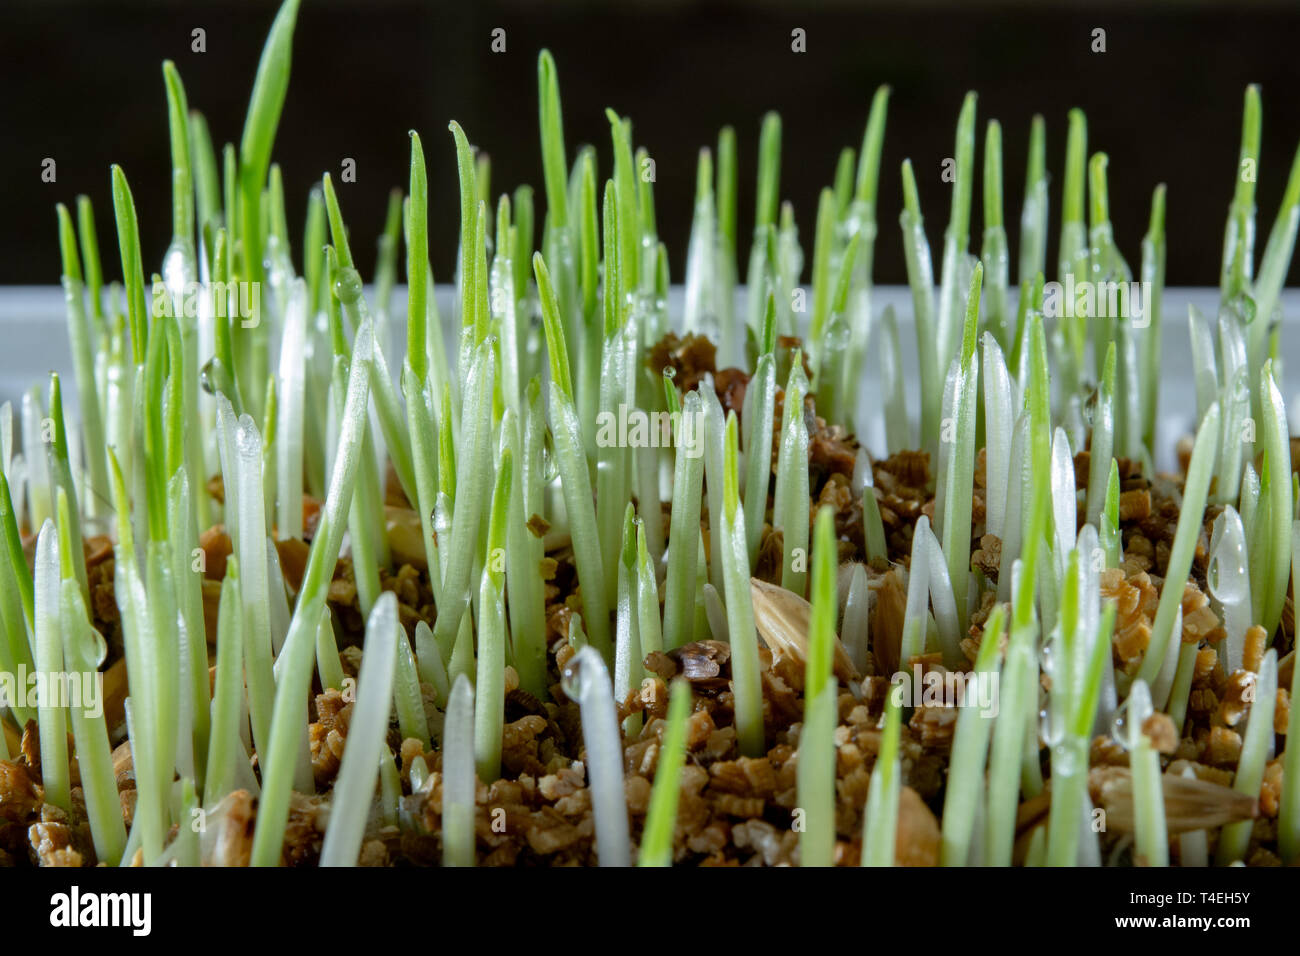 Young growing green sprouts of cat grass, Dactylis glomerata, close up Stock Photo